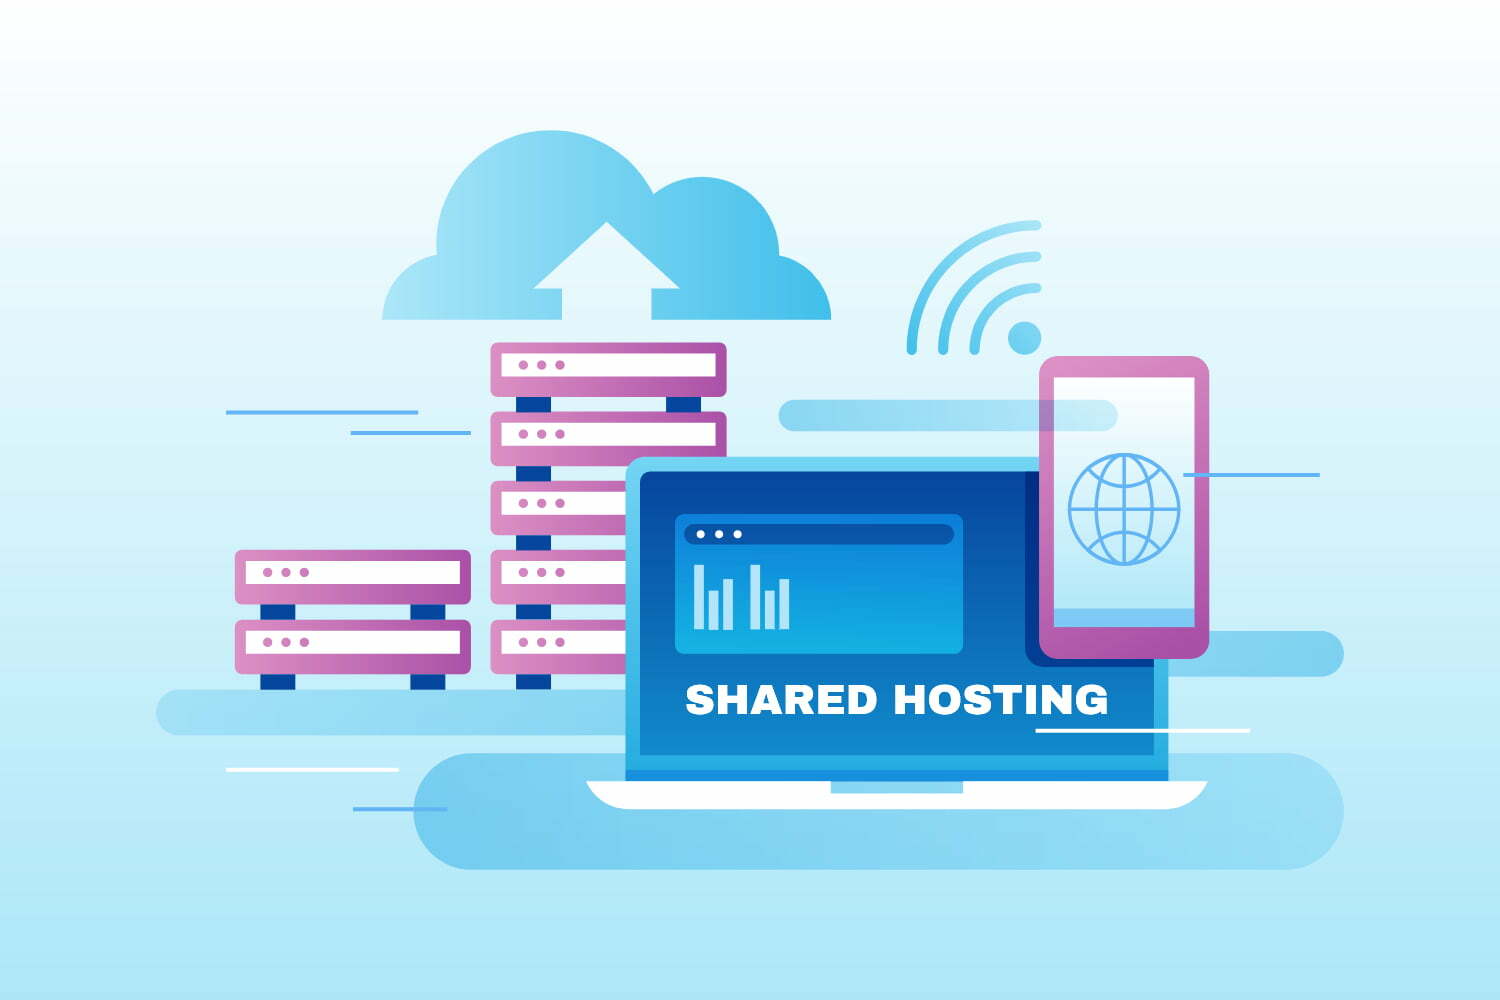 All About Shared Hosting in Technical Terms